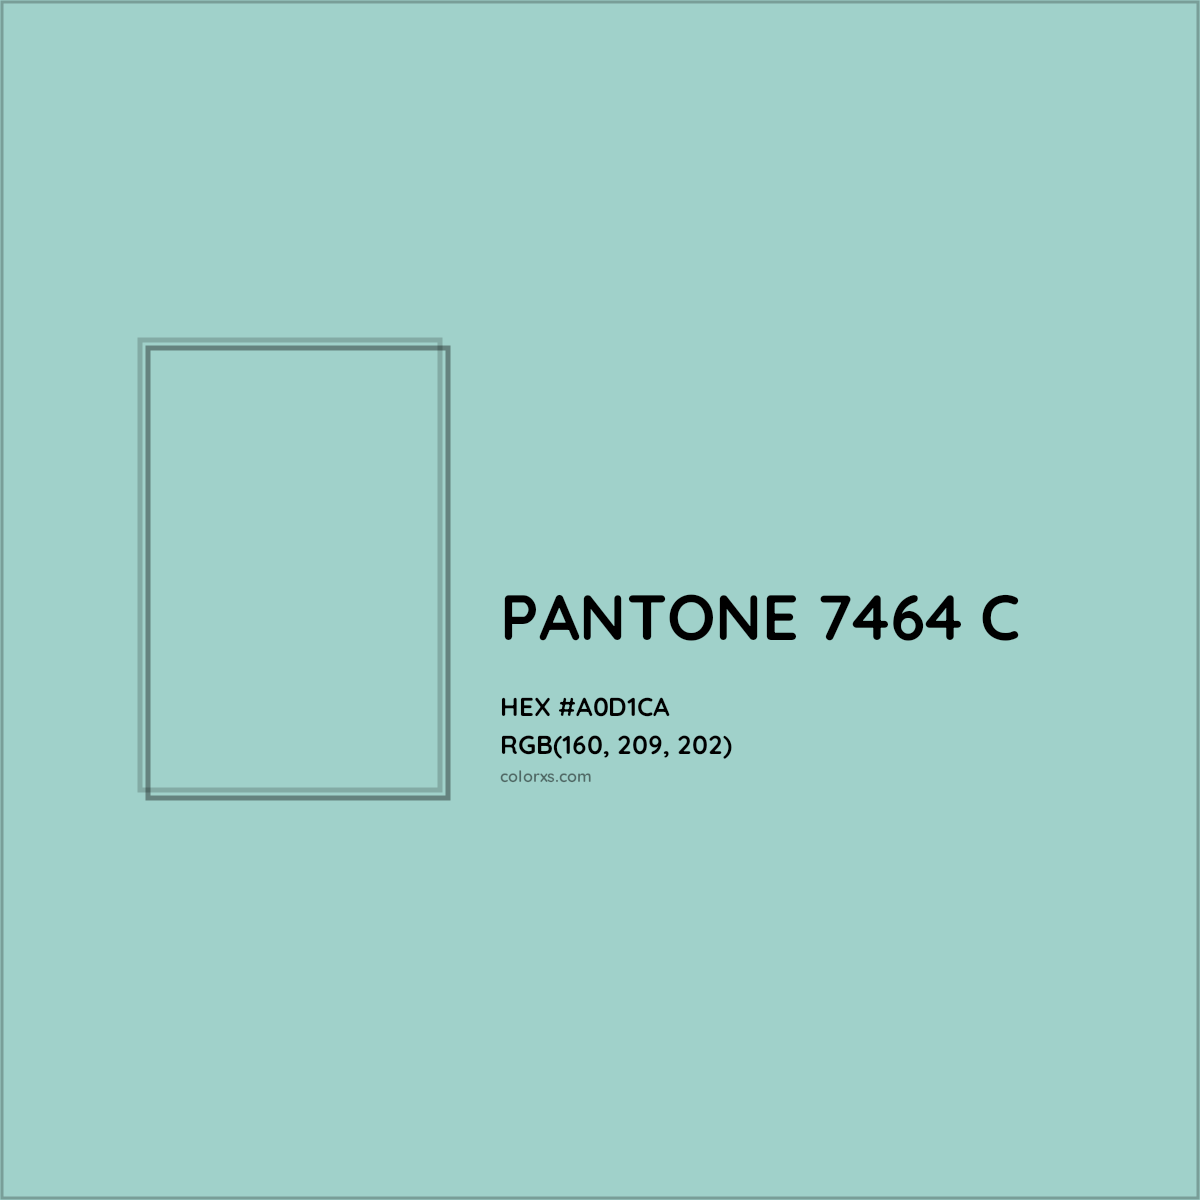 Pantone 7464 C Complementary Or Opposite Color Name And Code A0d1ca